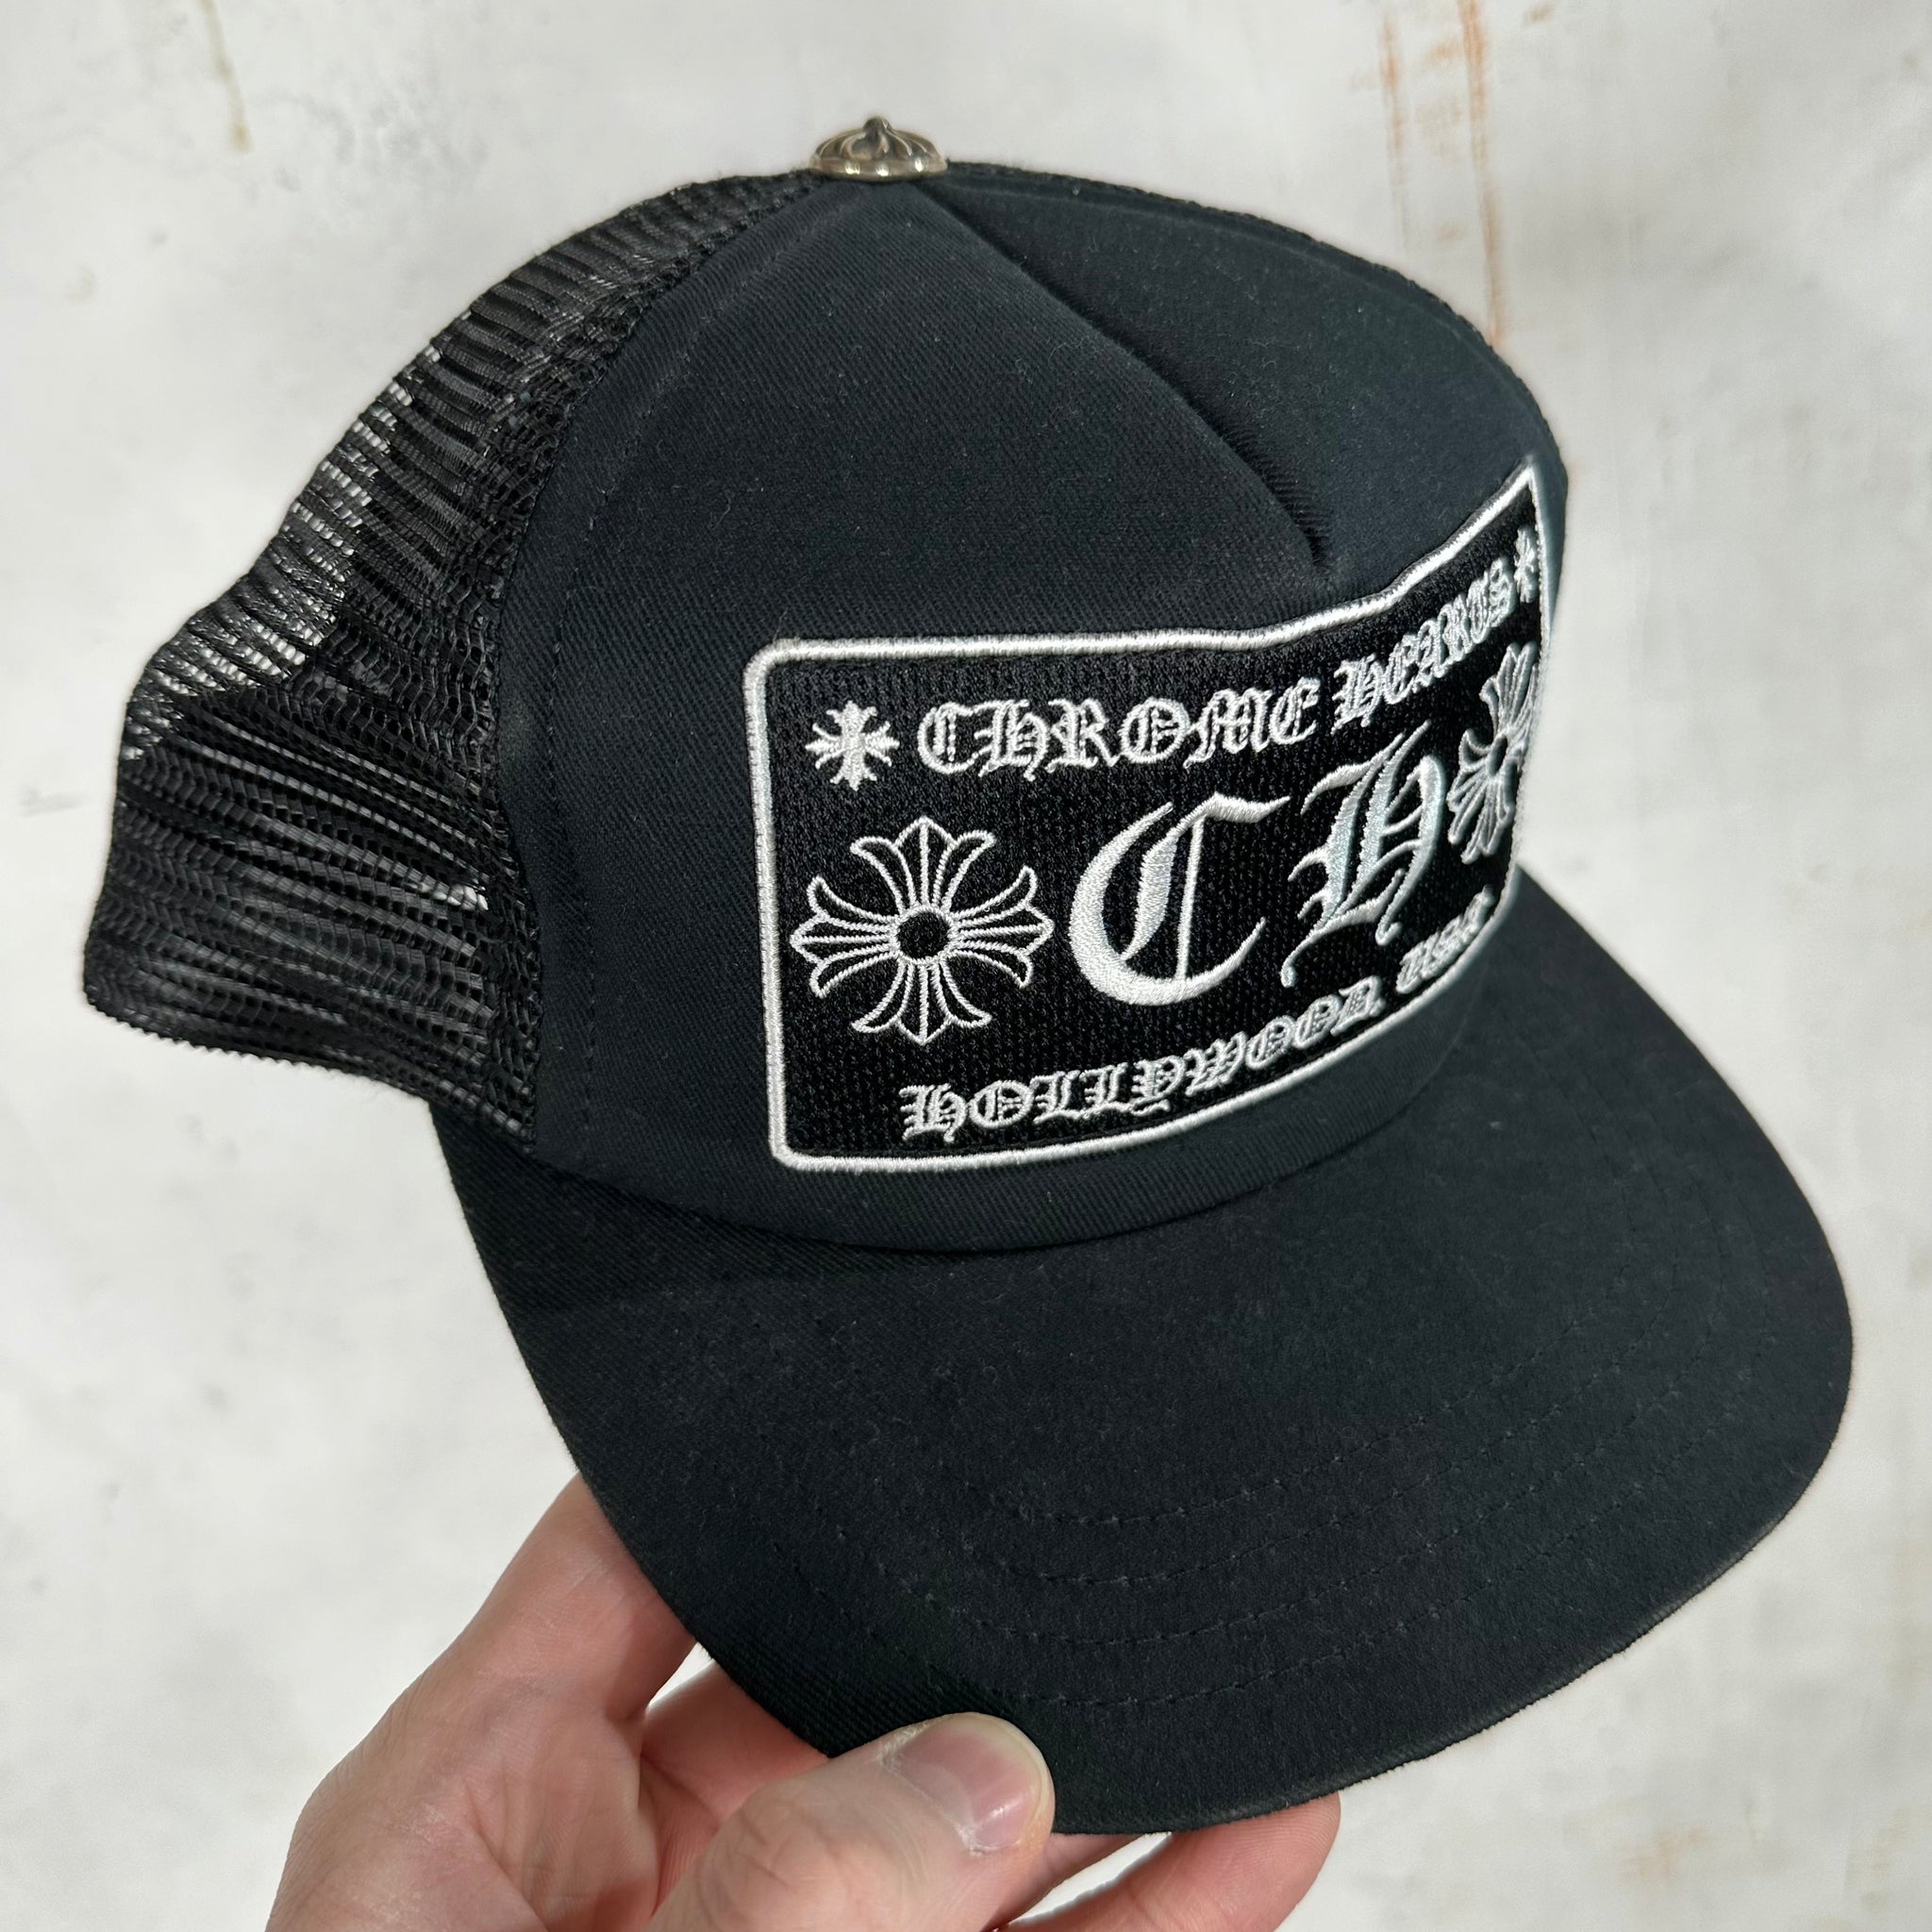 Chrome Hearts Hollywood USA Trucker Hat – www.Lukes.store